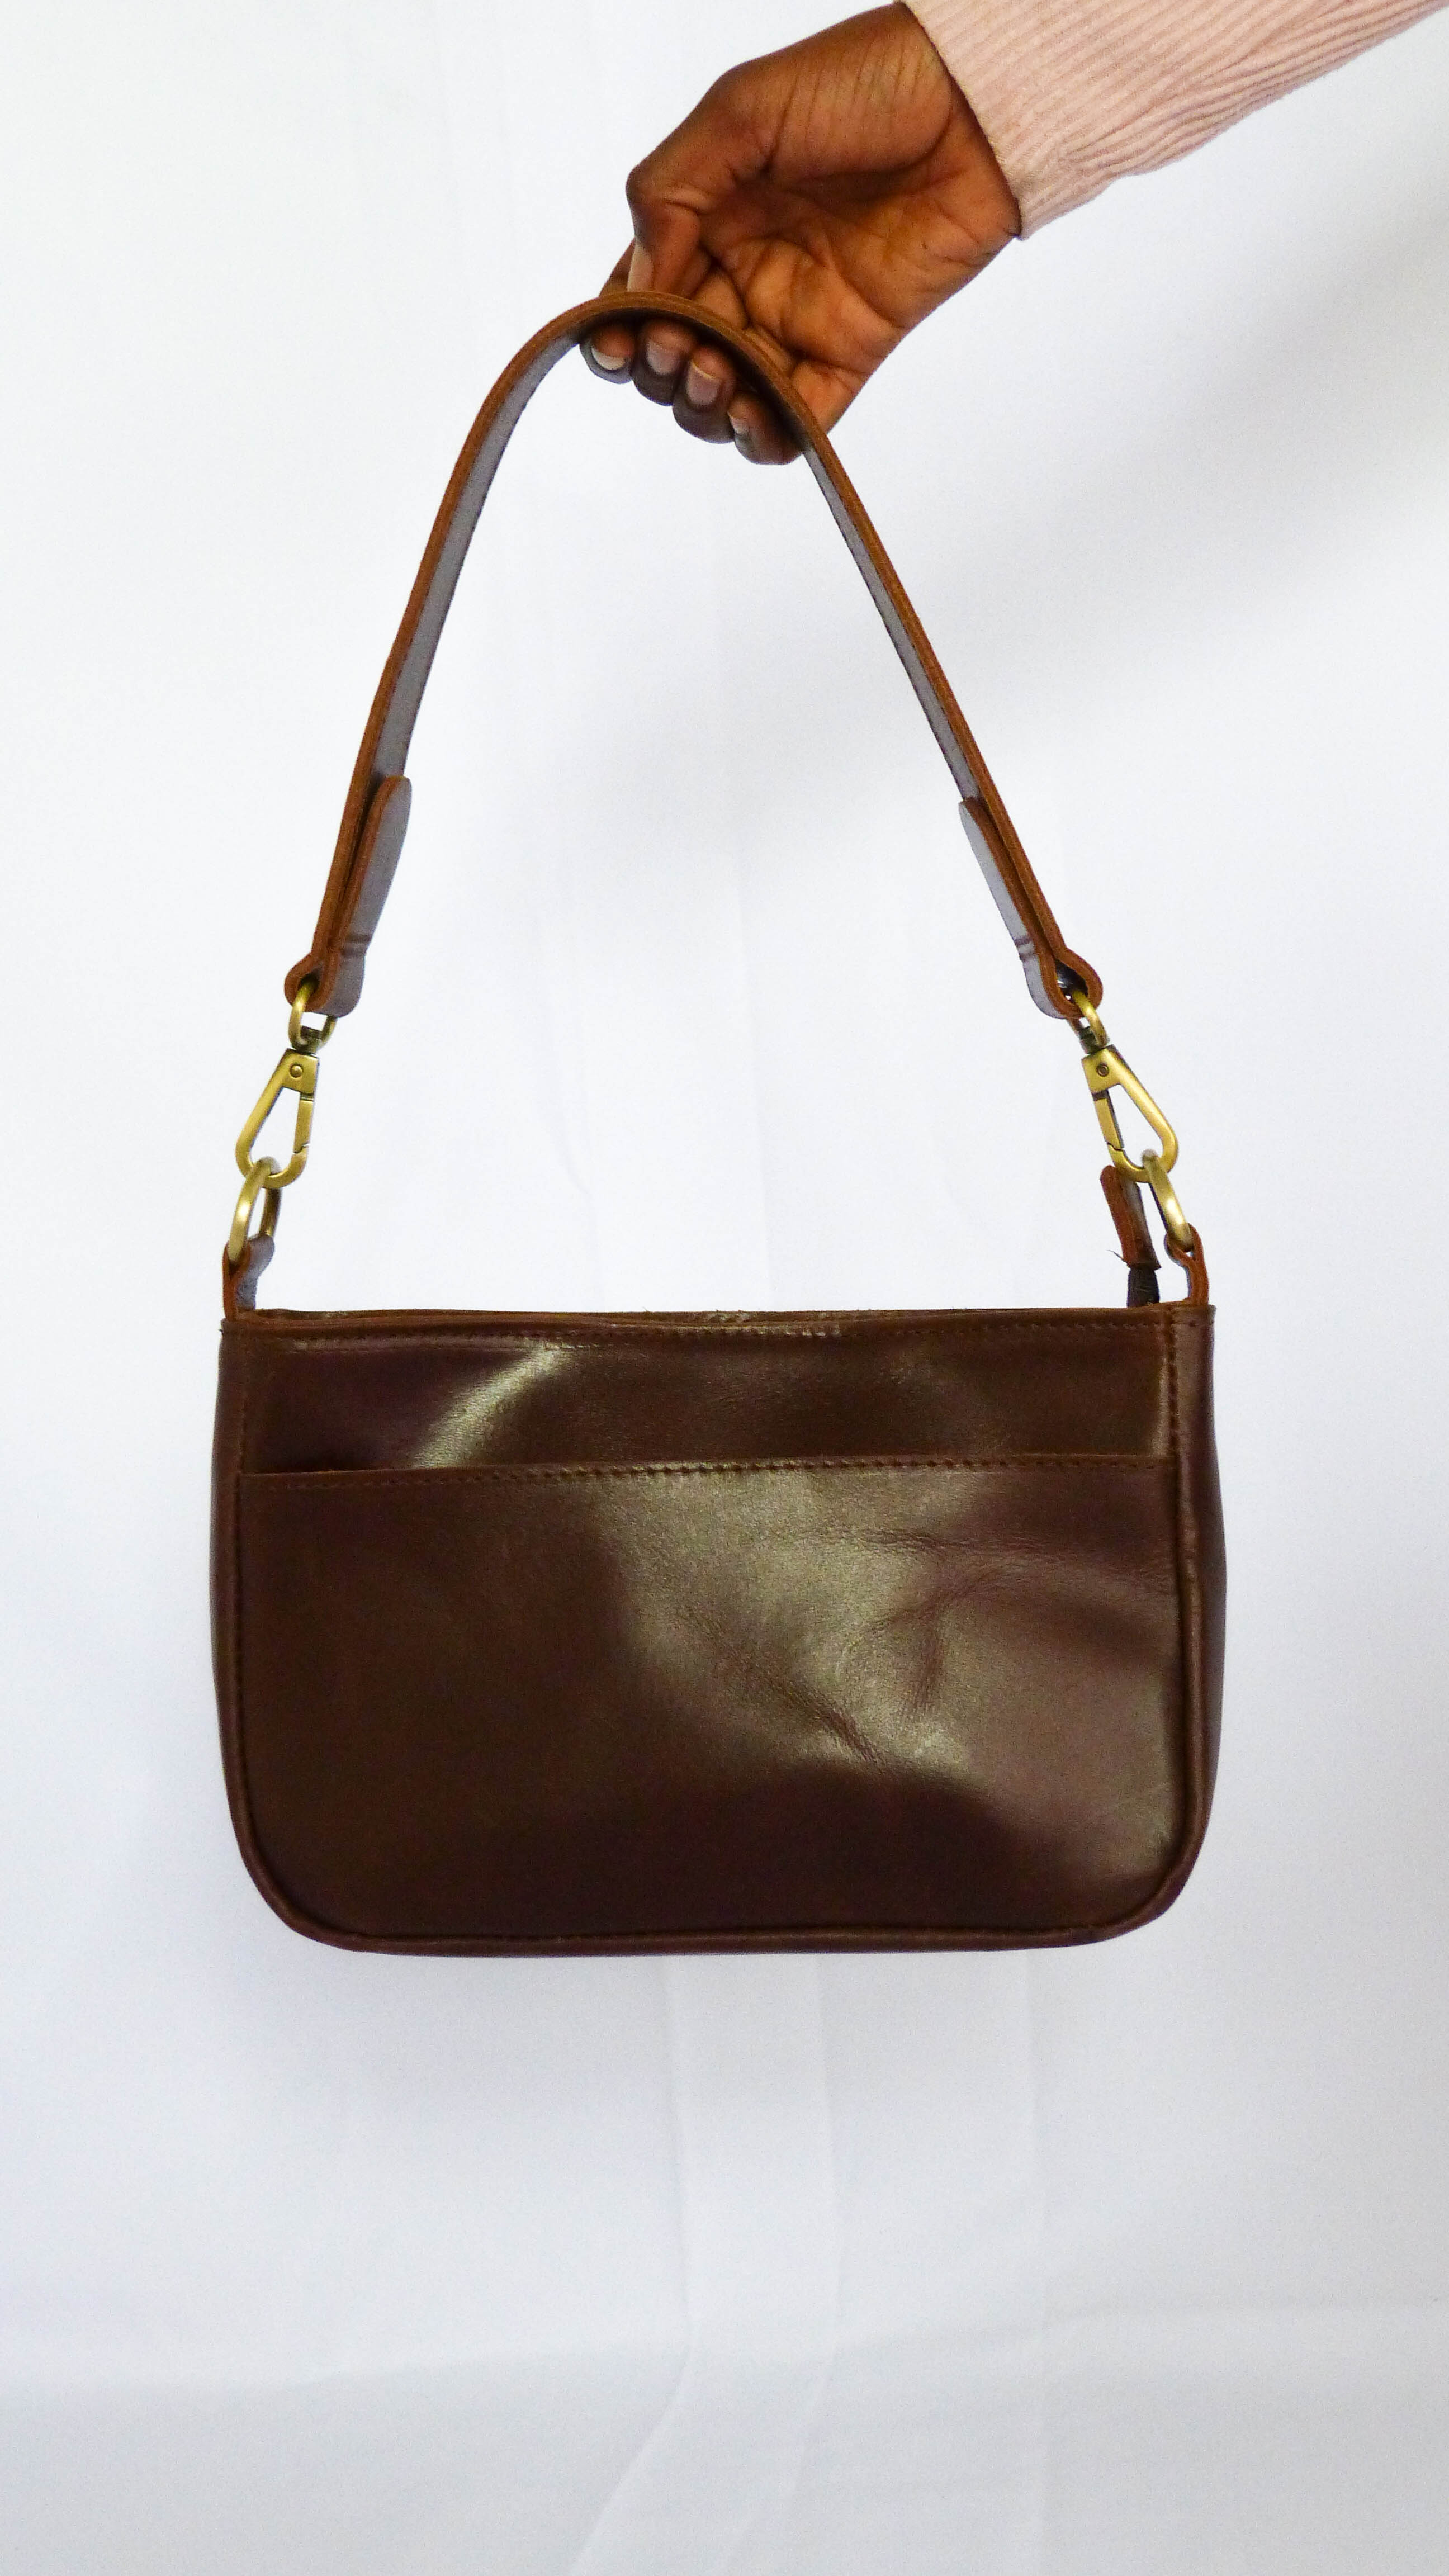 A brown leather purse with gold handles and accents, featuring a removable shoulder strap. Perfect for everyday use, with zippered top, inside zipper pocket, and phone pocket. Handmade by Ethiopian artisans.